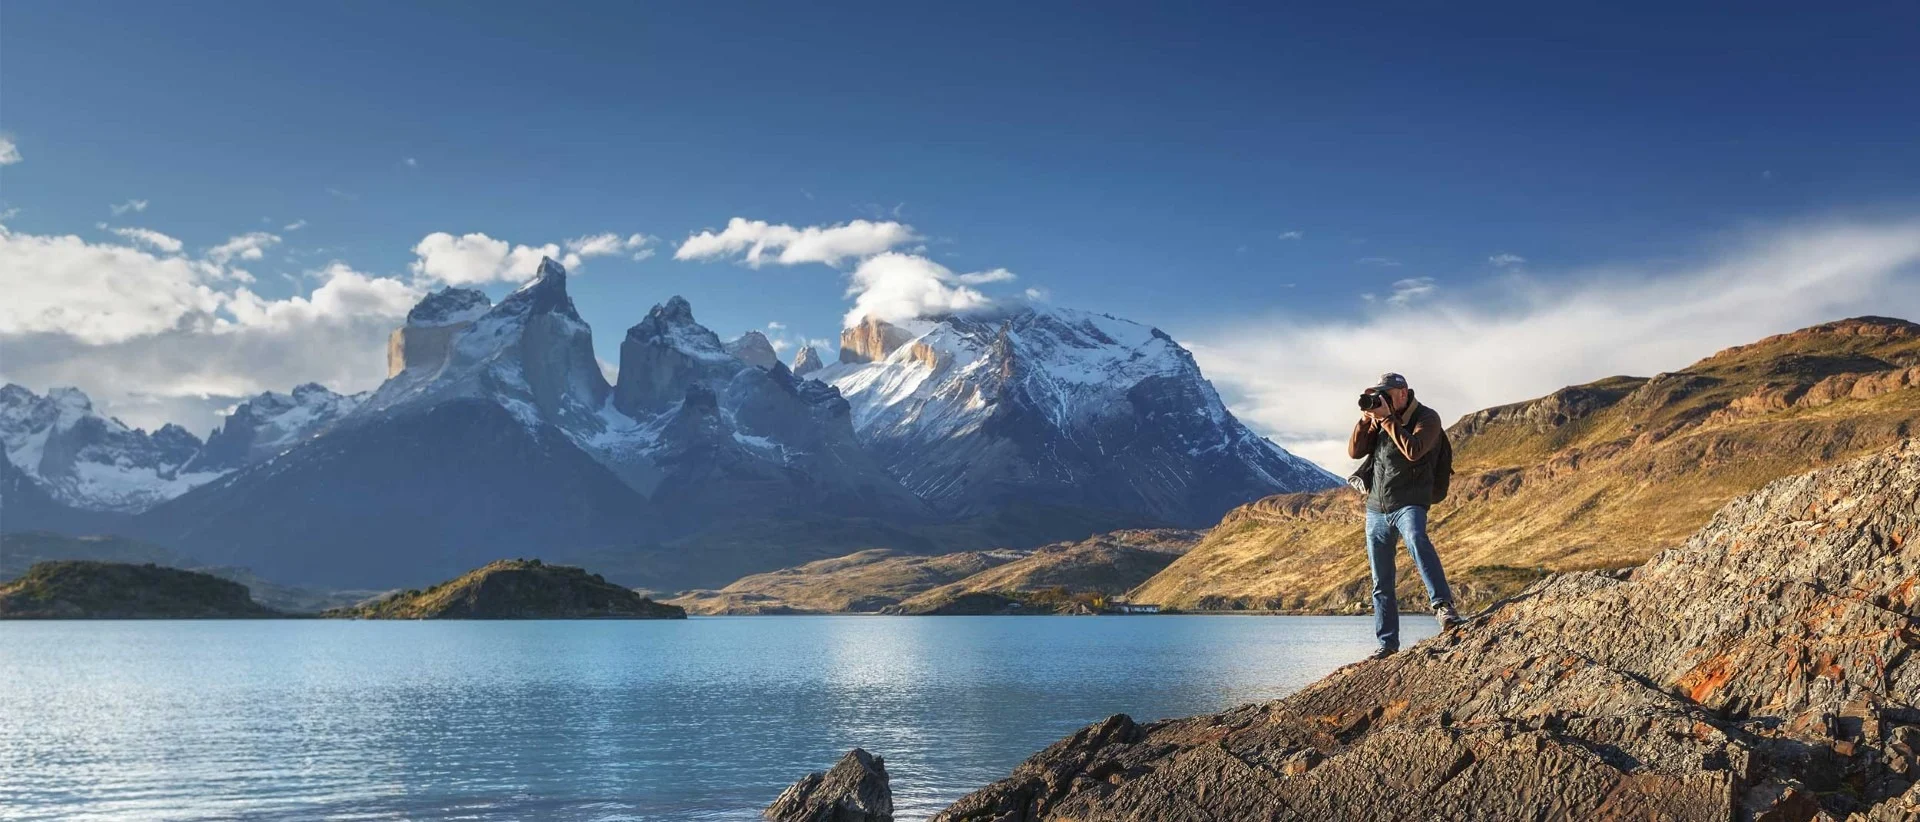 Torres del Paine National Park, Patagonia, Chile. Photo: Sunsinger